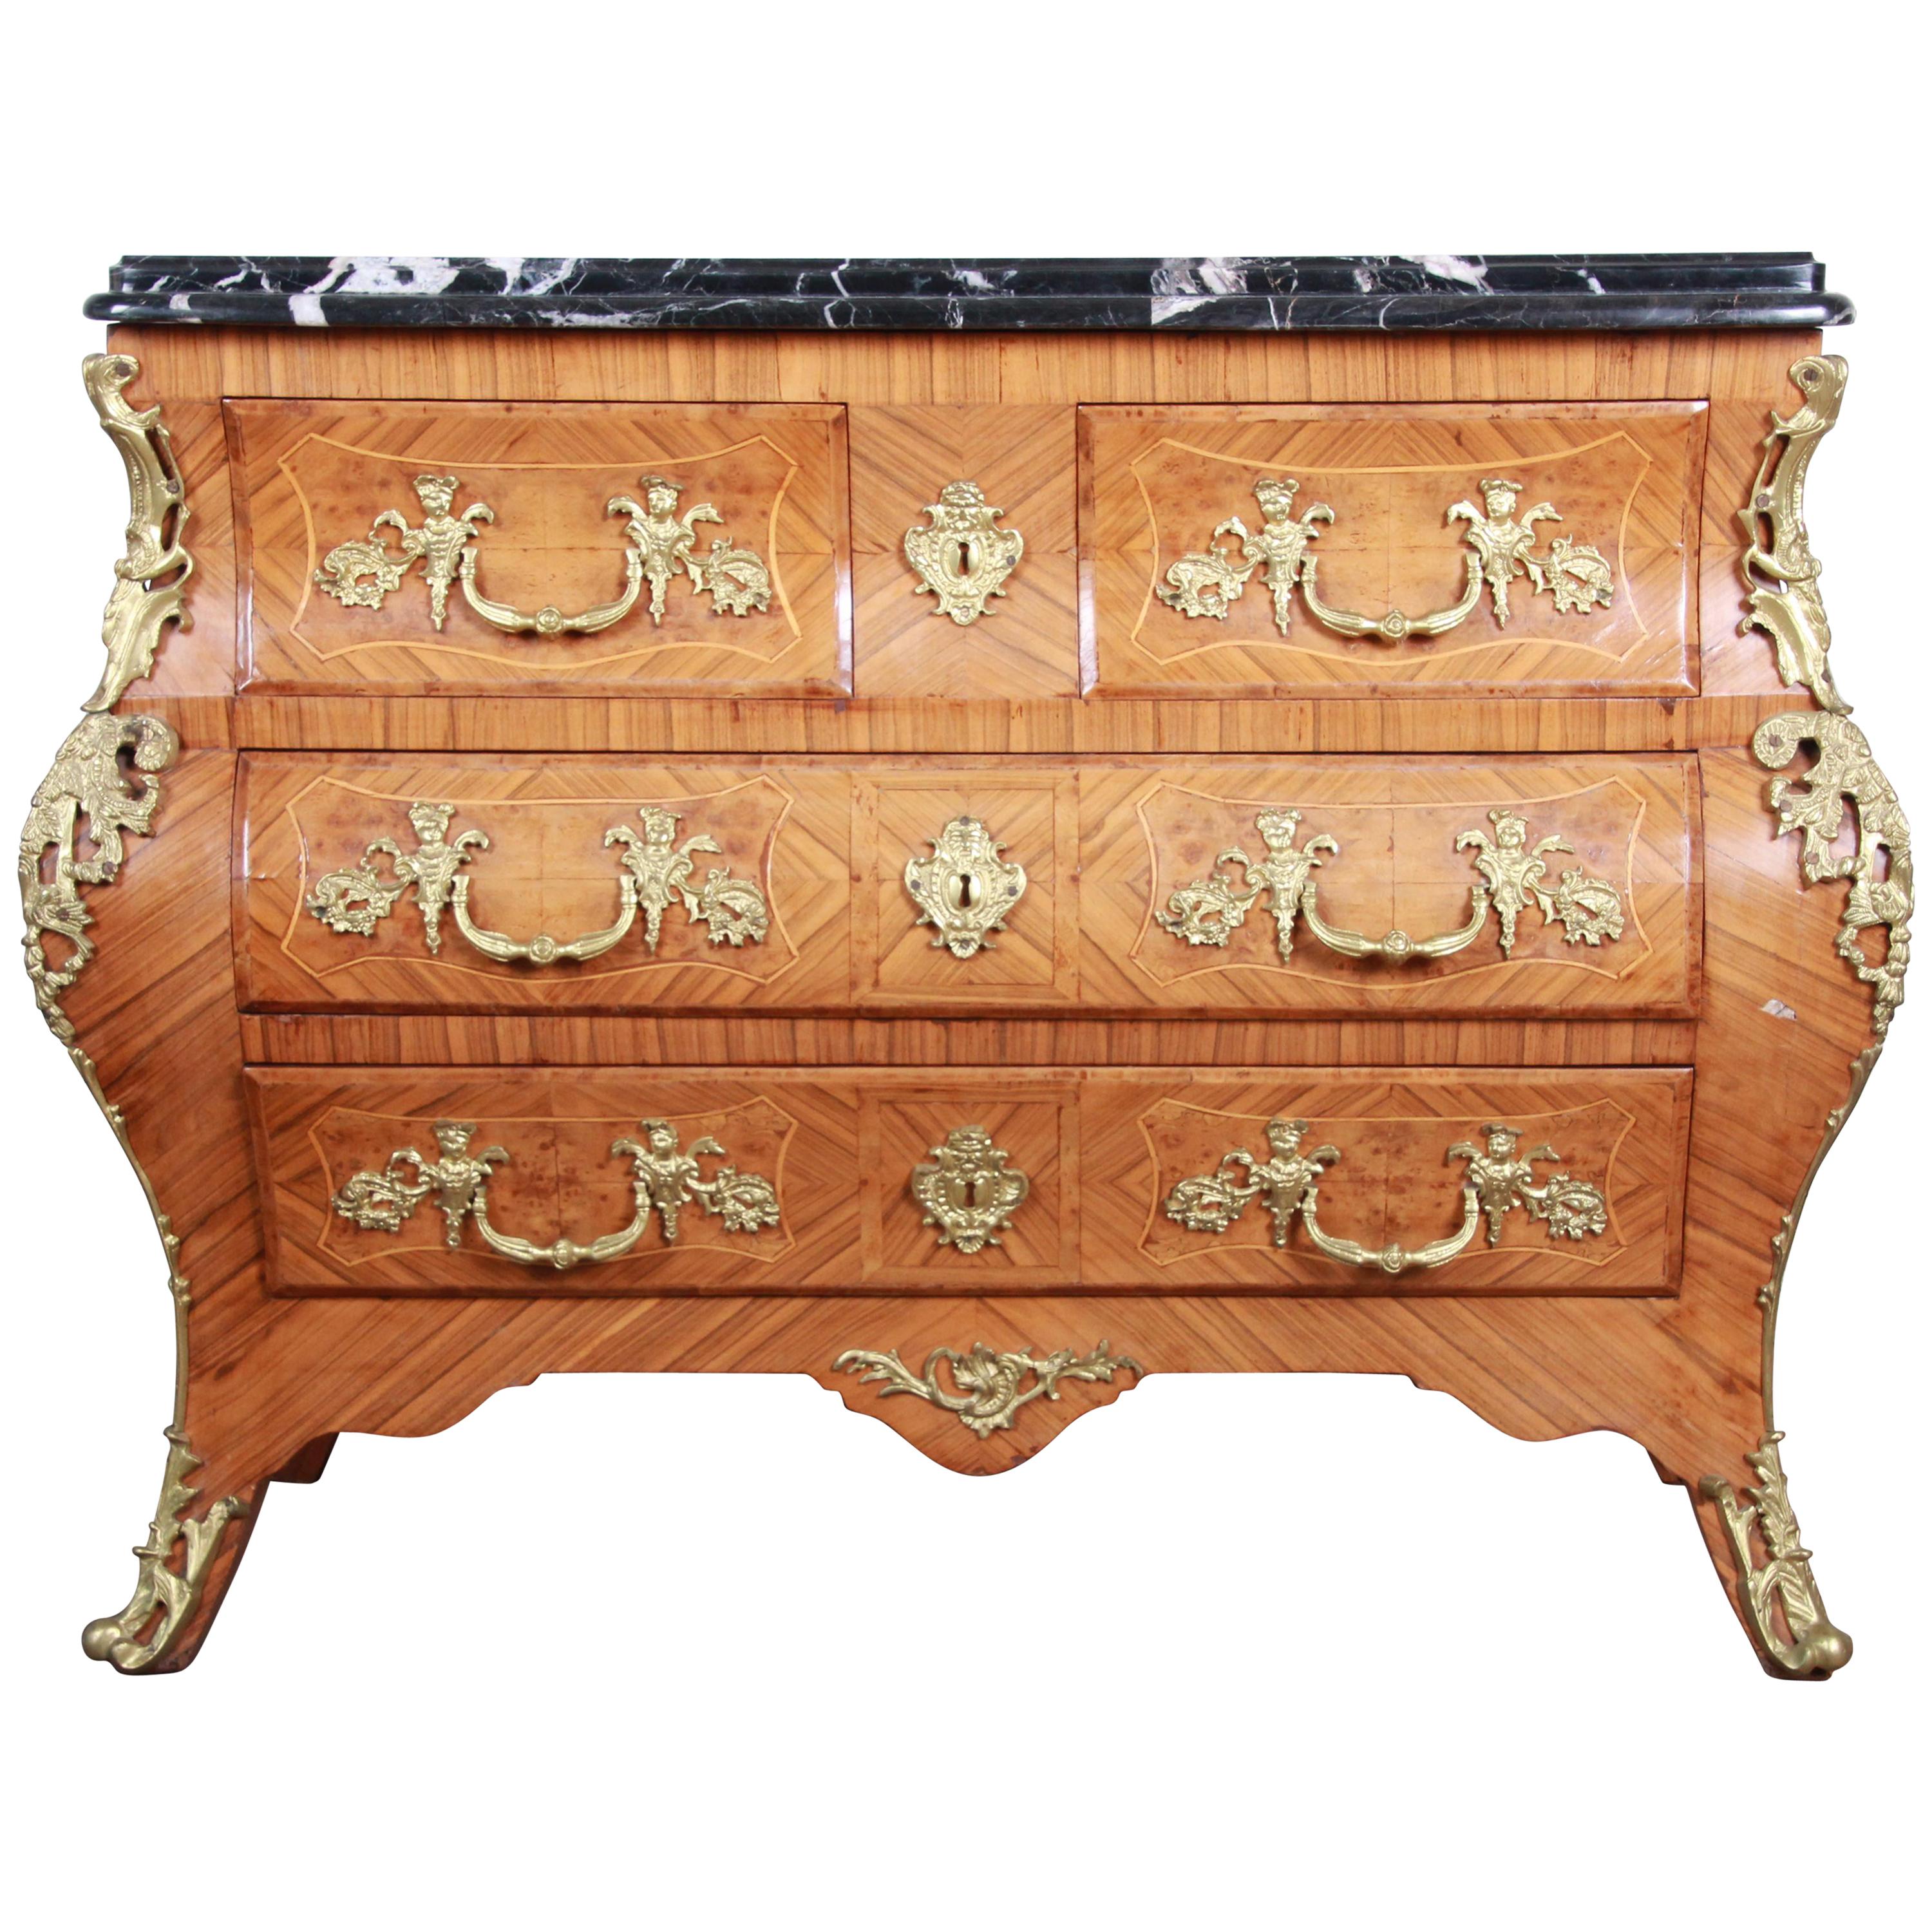 Ornate French Louis XV Style Inlaid Mahogany Marble Top Bombay Chest